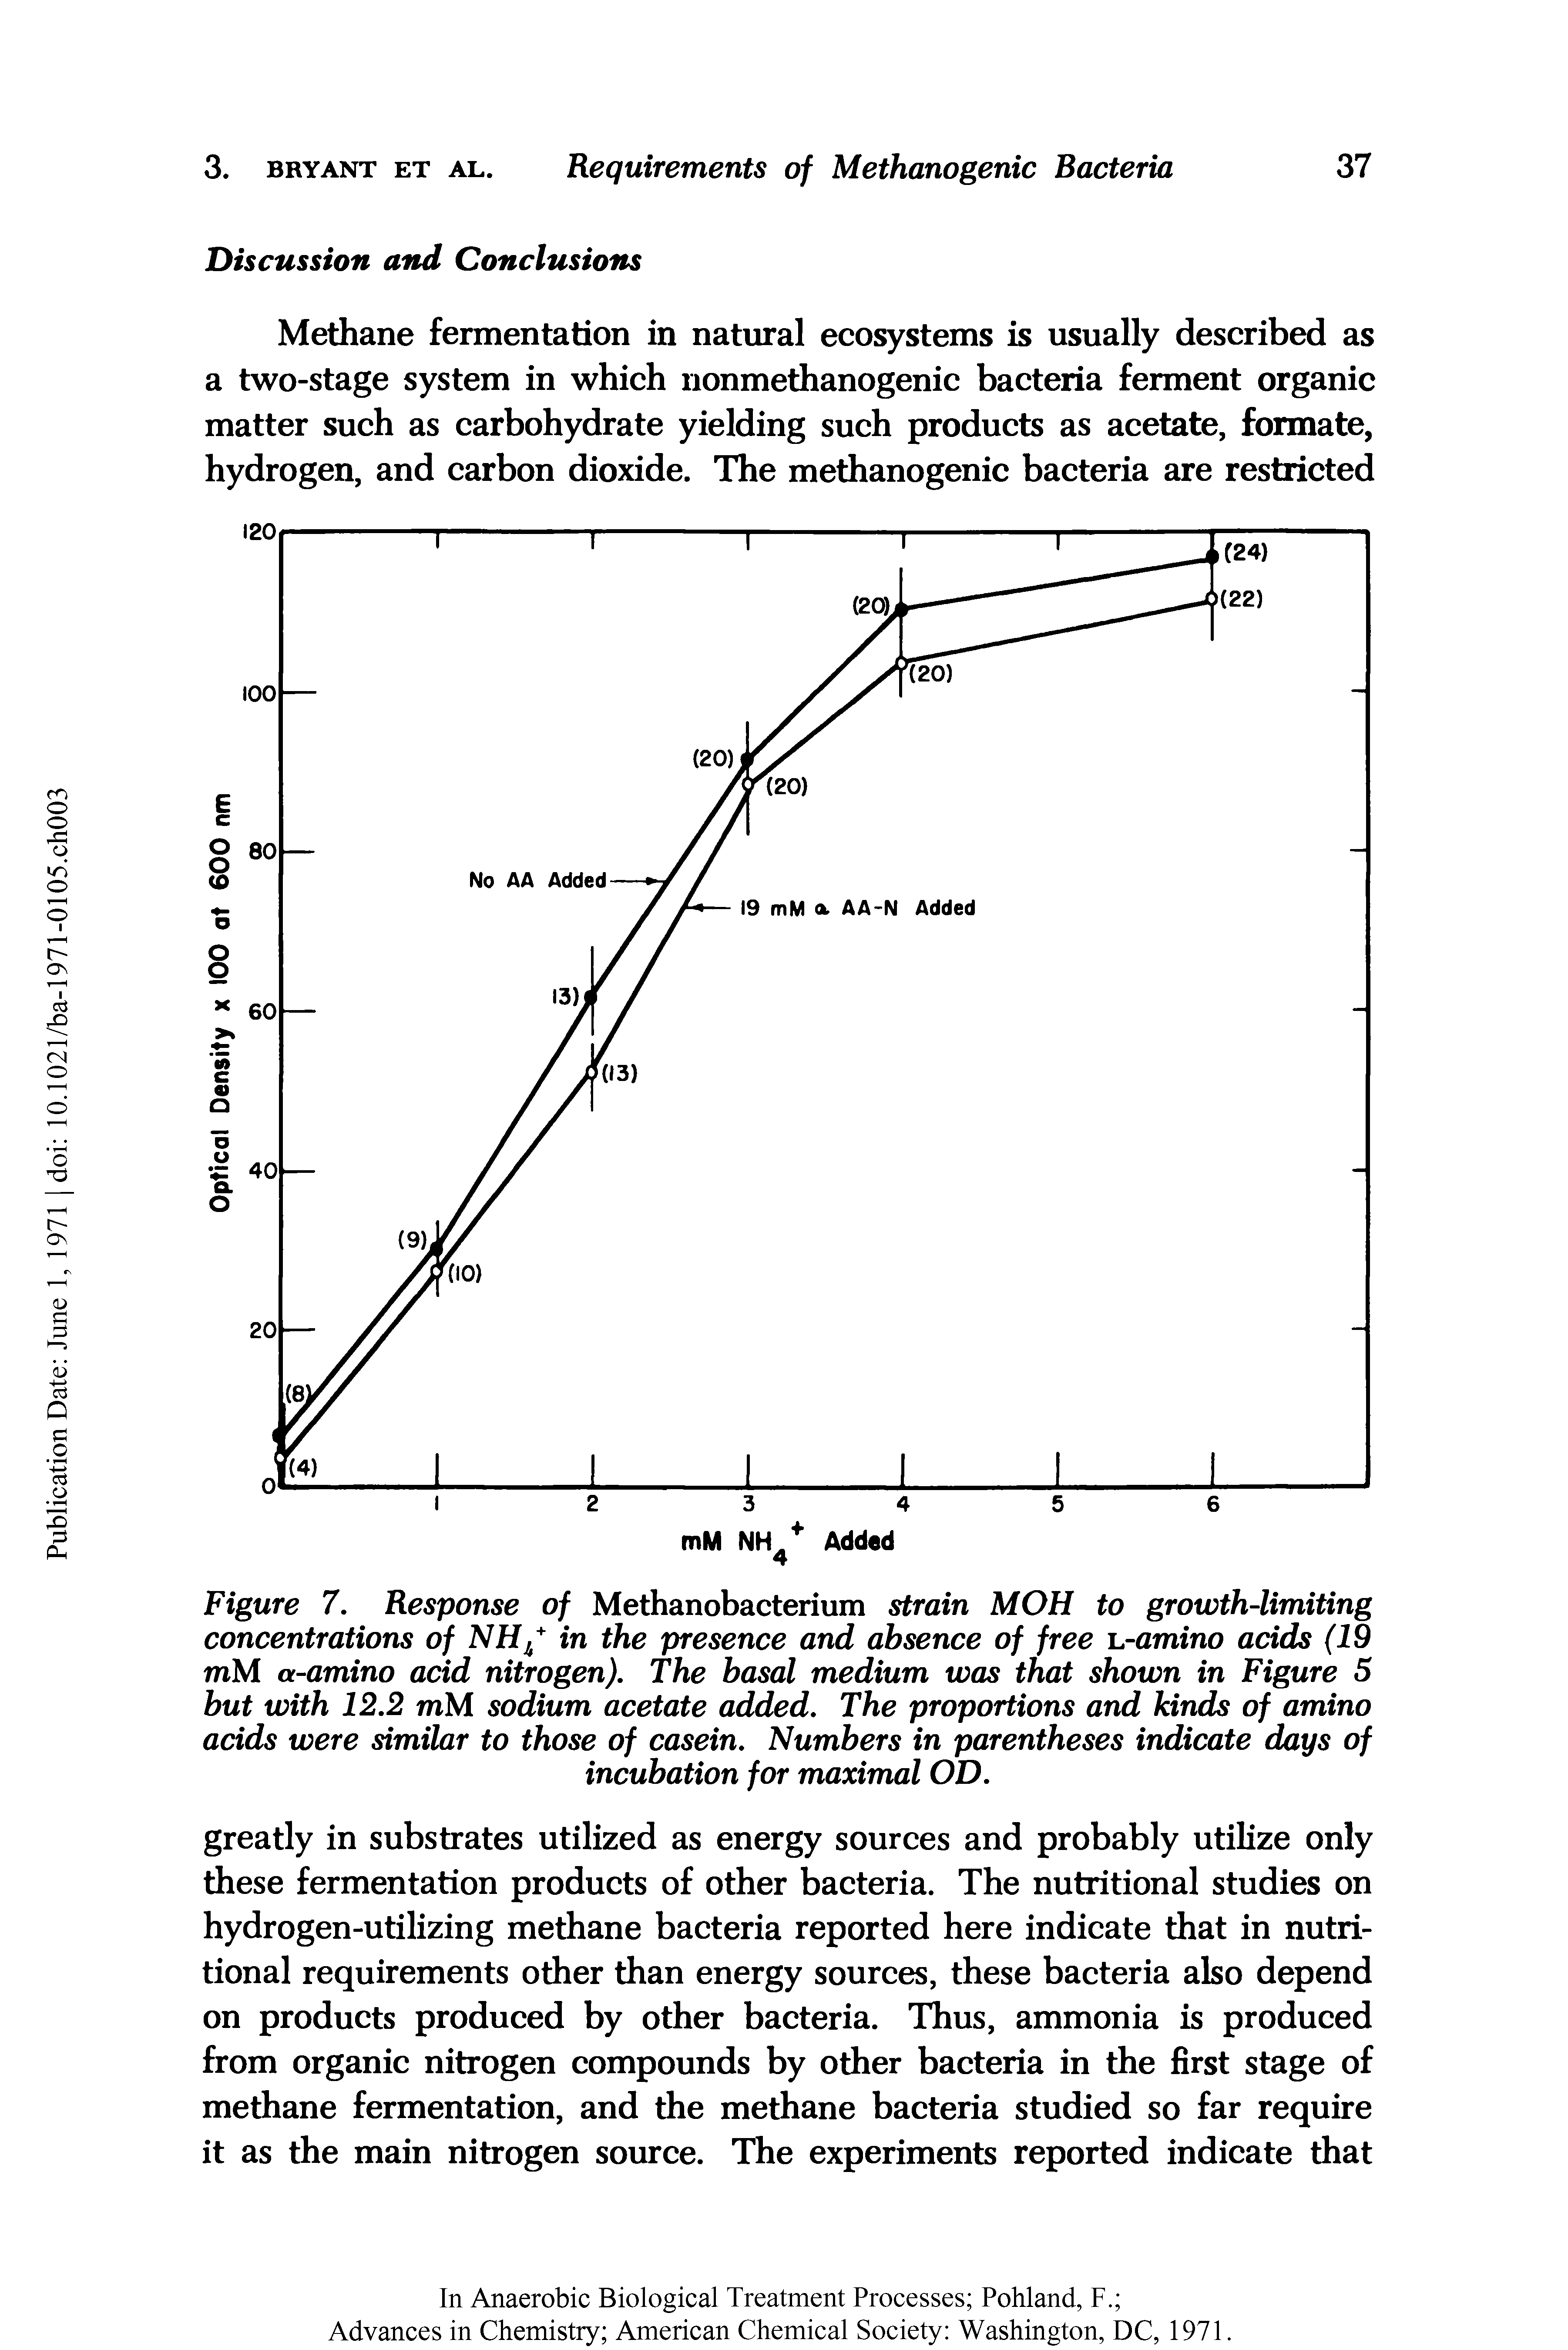 Figure 7. Response of Methanobacterium strain MOH to growth-limiting concentrations of in the presence and absence of free i.-amino adds (19 mM a-amino acid nitrogen). The basal medium was that shown in Figure 5 but with 12.2 mM sodium acetate added. The proportions and kinds of amino adds were similar to those of casein. Numbers in parentheses indicate days of incubation for maximal OD.